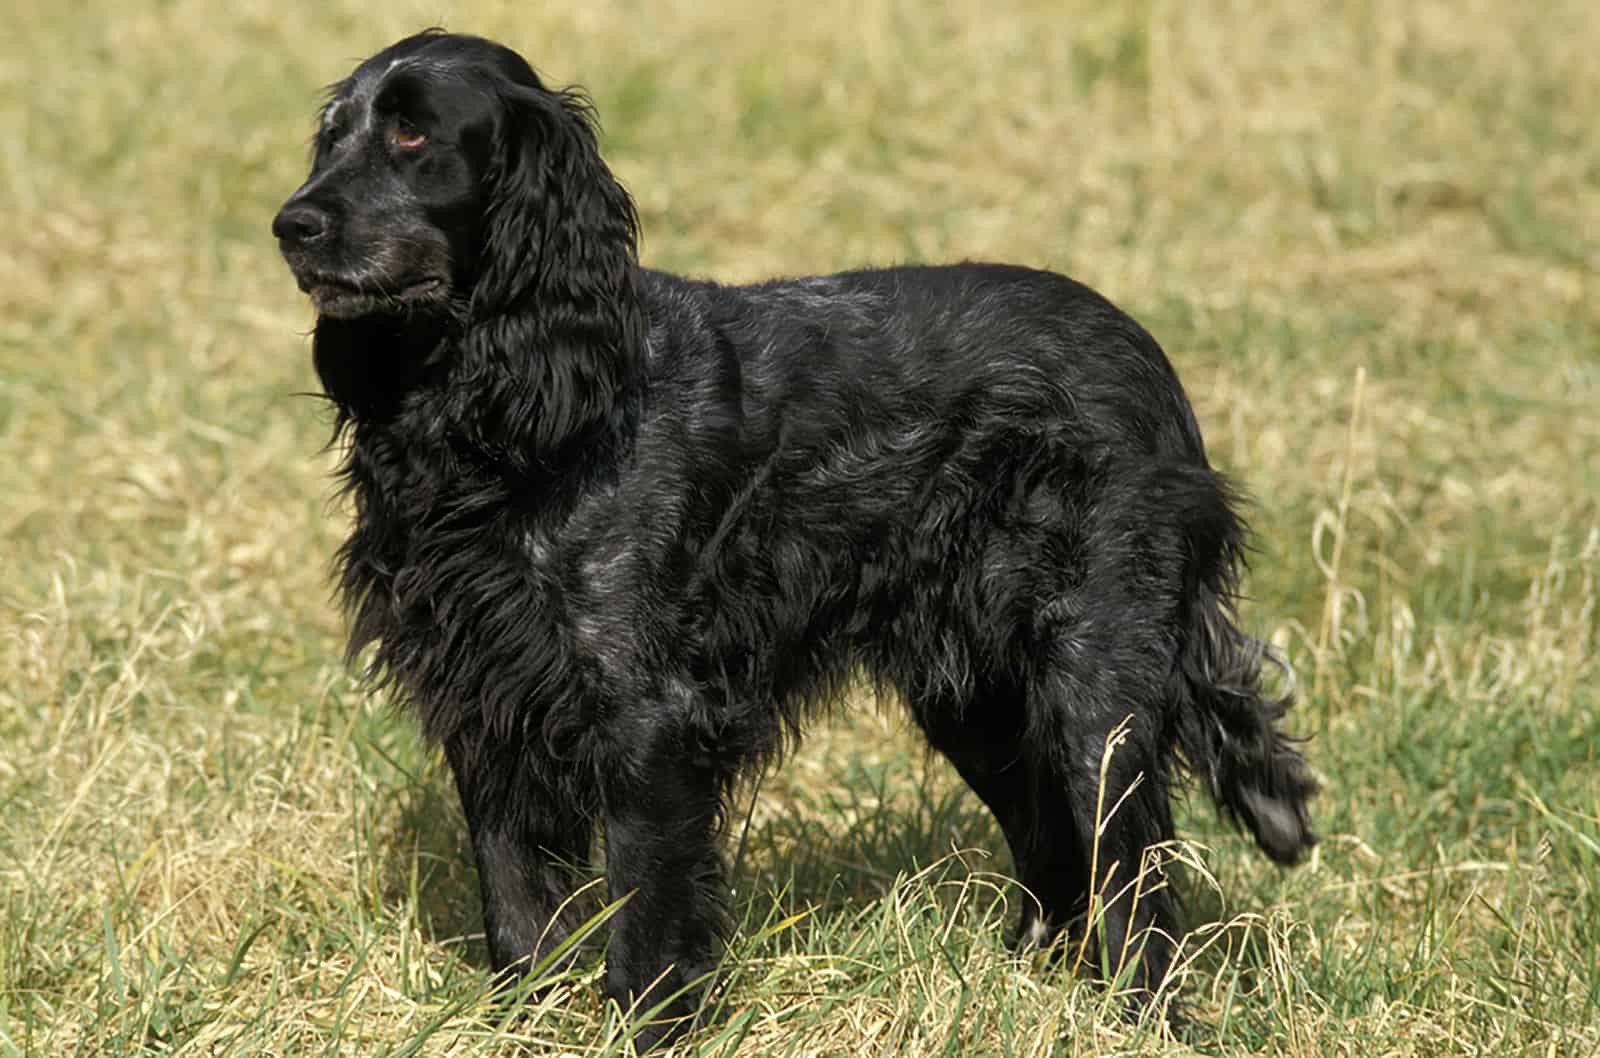 blue picardy spaniel dog standing on Grass